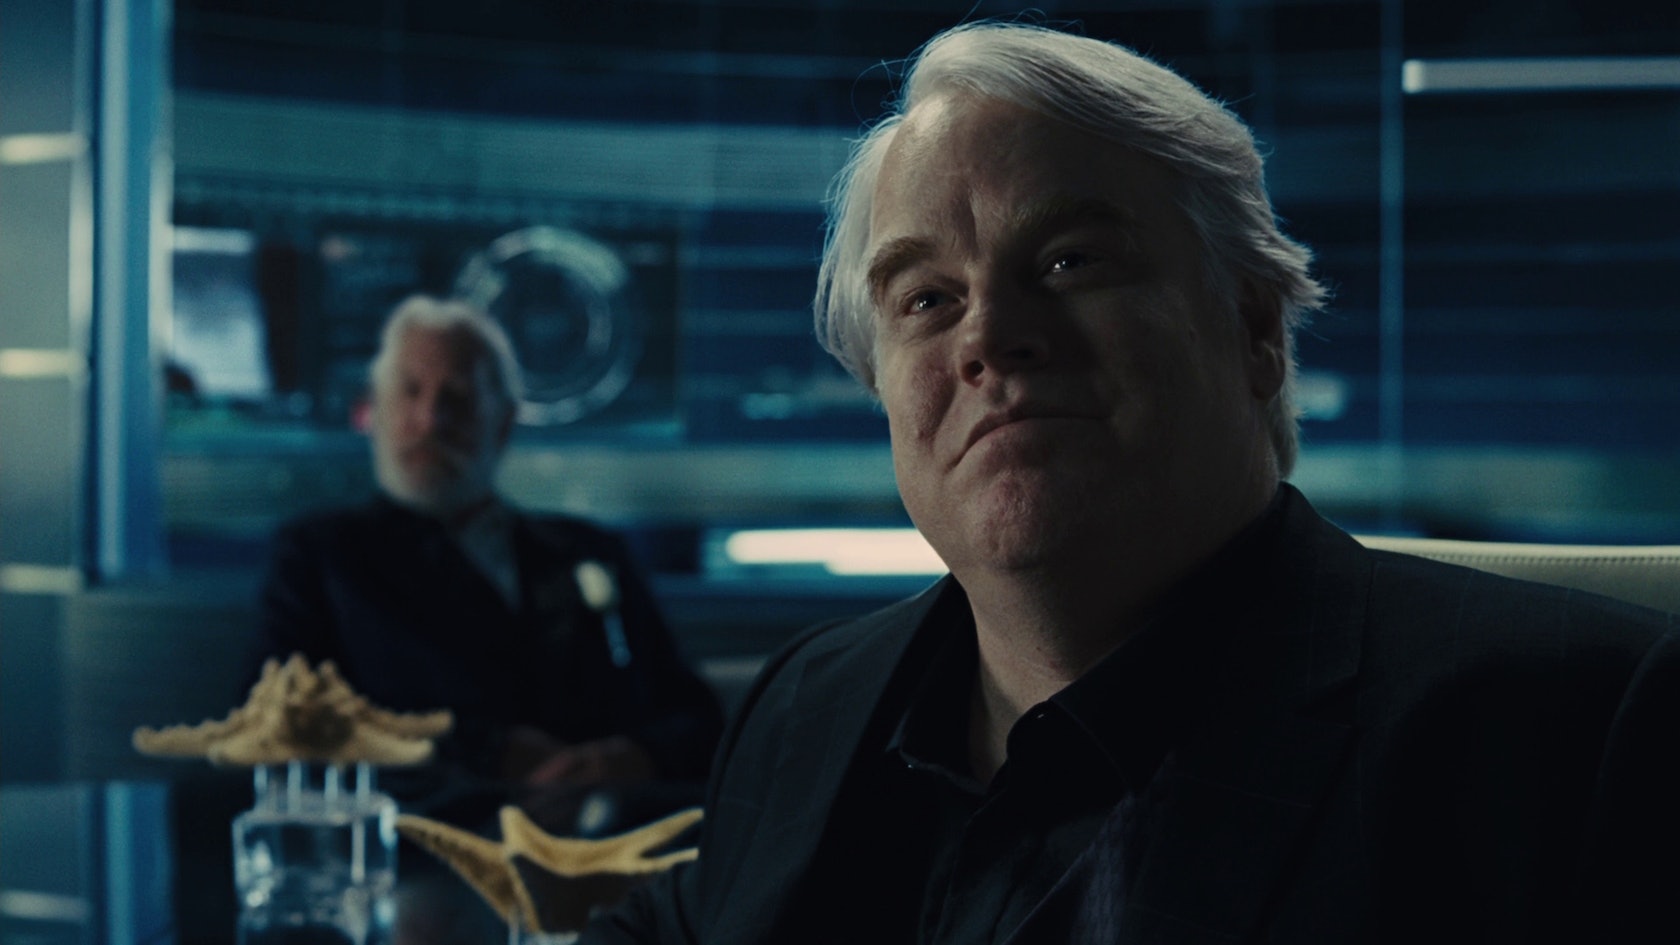 Hunger Games To Use Cgi Technology To Replace Philip Seymour Hoffman S Final Scenes Mail Online Printable